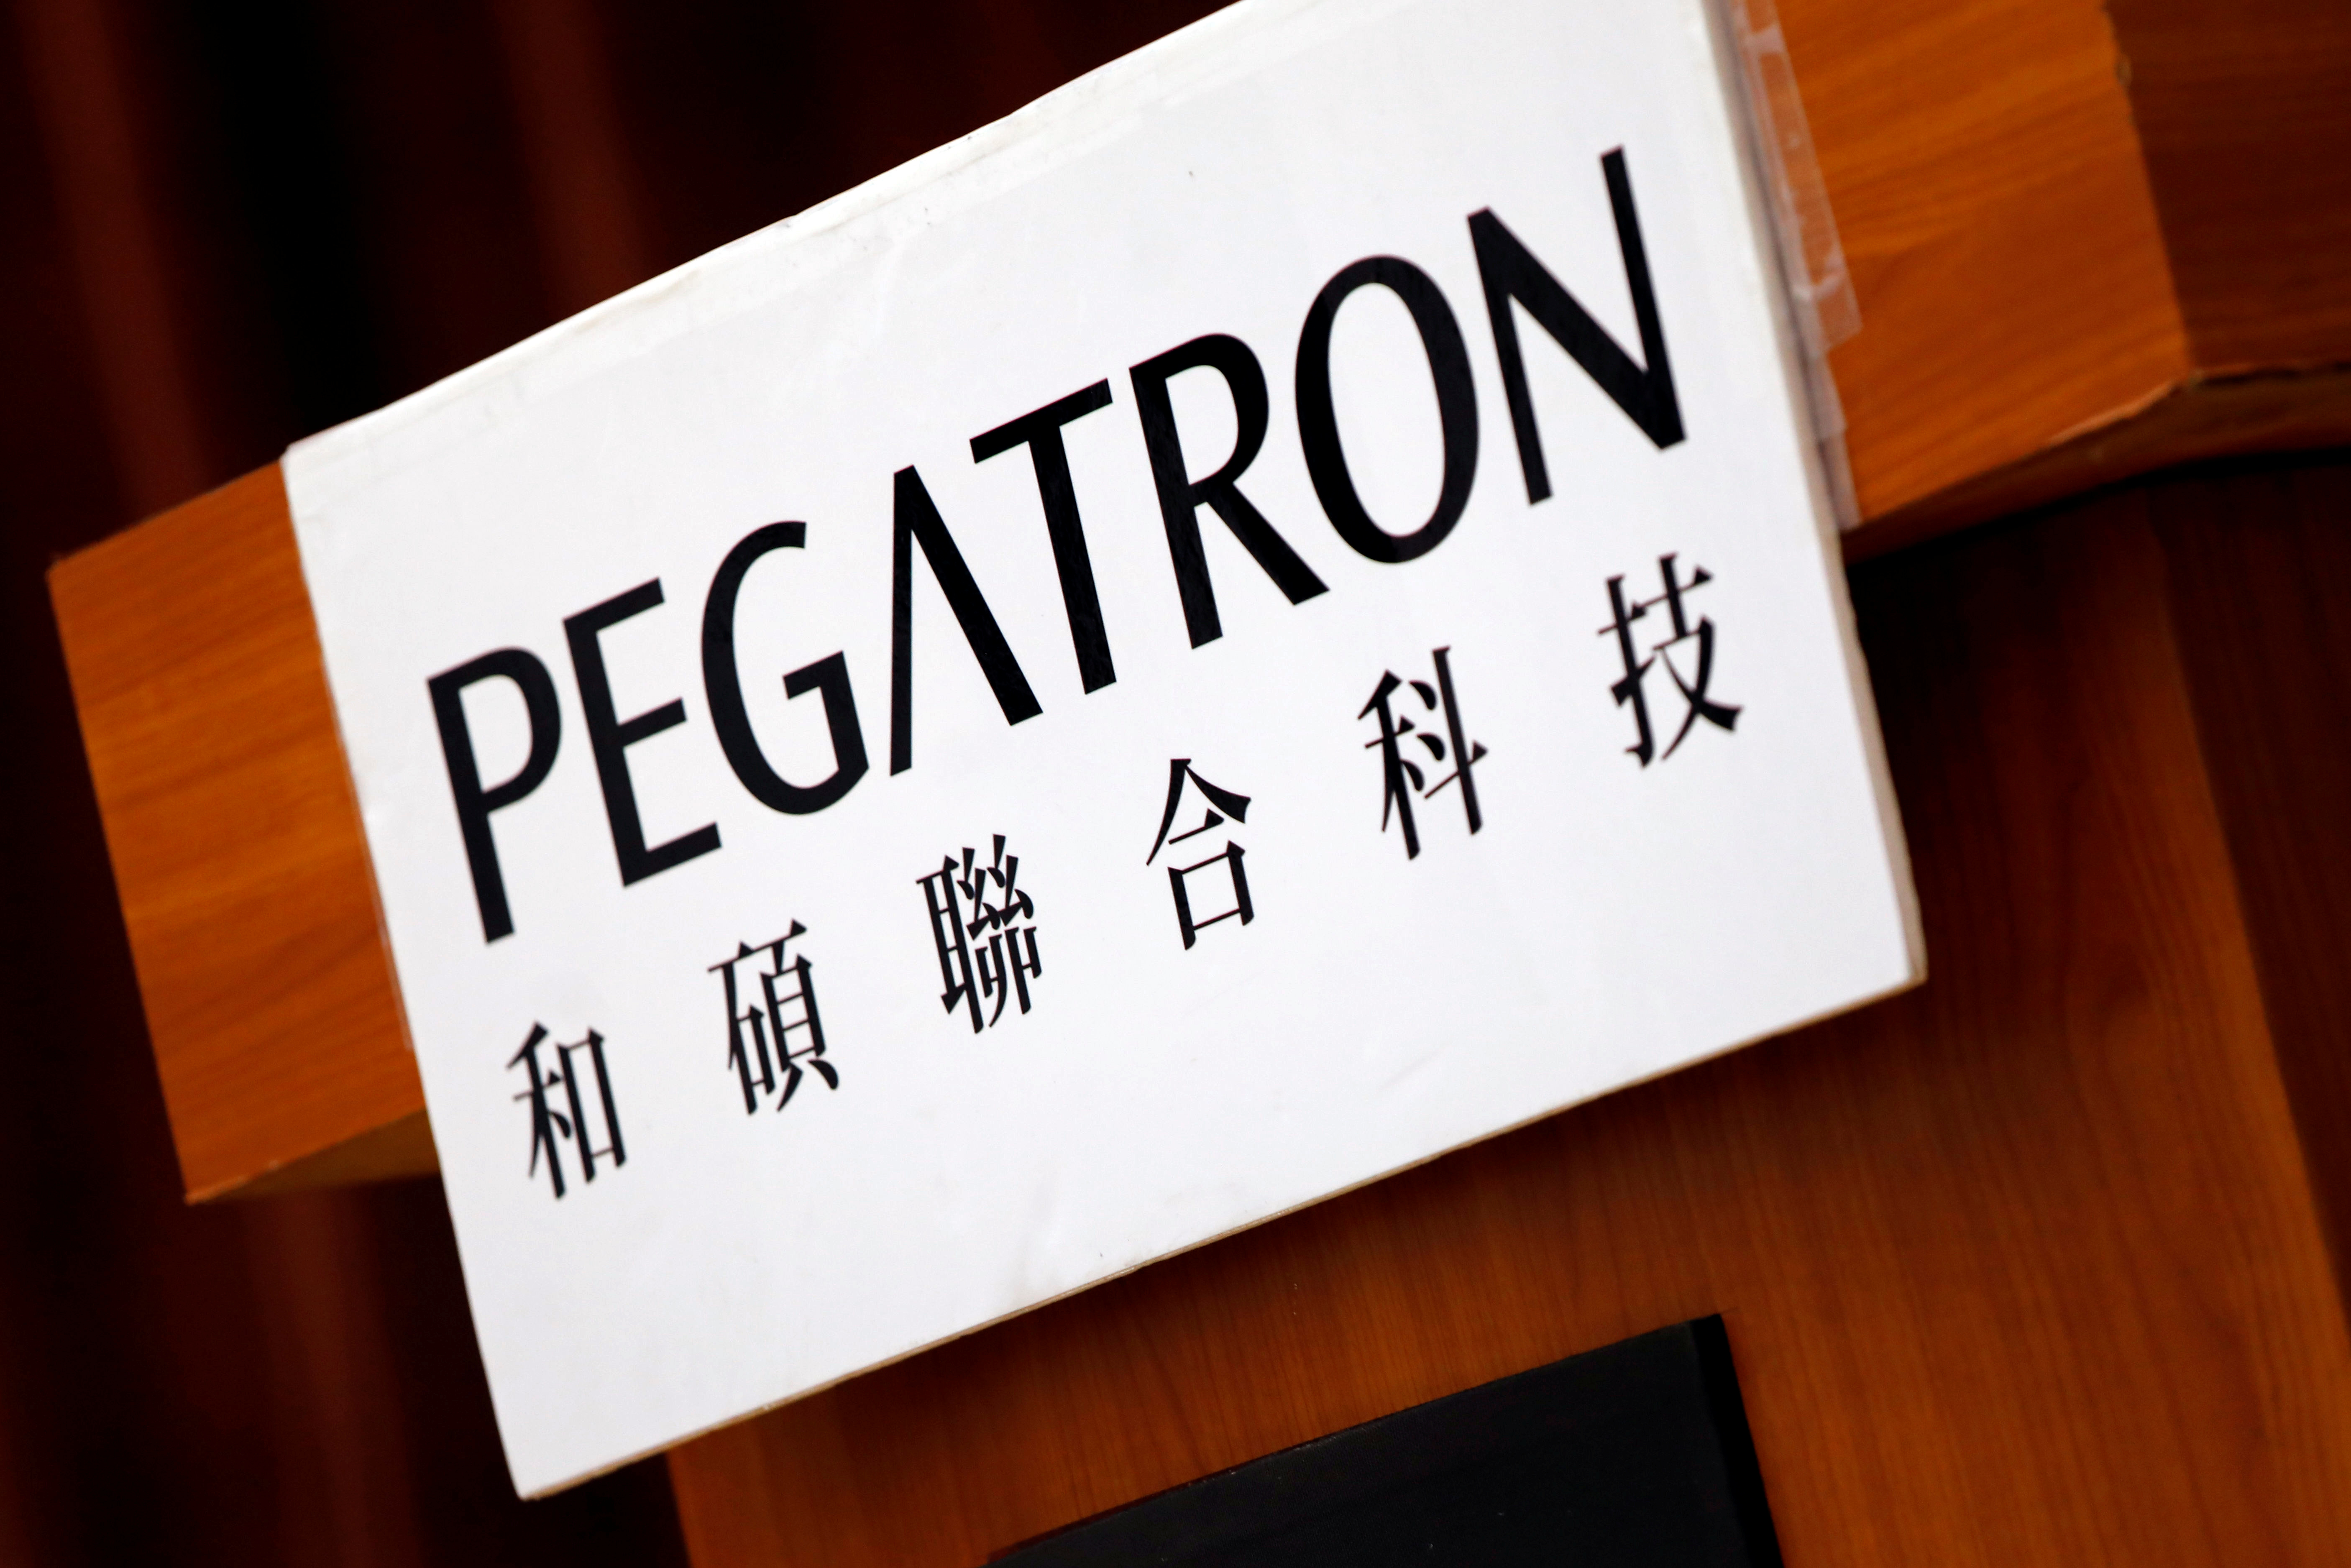 The logo of Pegatron, which assembles electronics from Apple Inc’s iPhones, is seen during an annual general meeting in Taipei